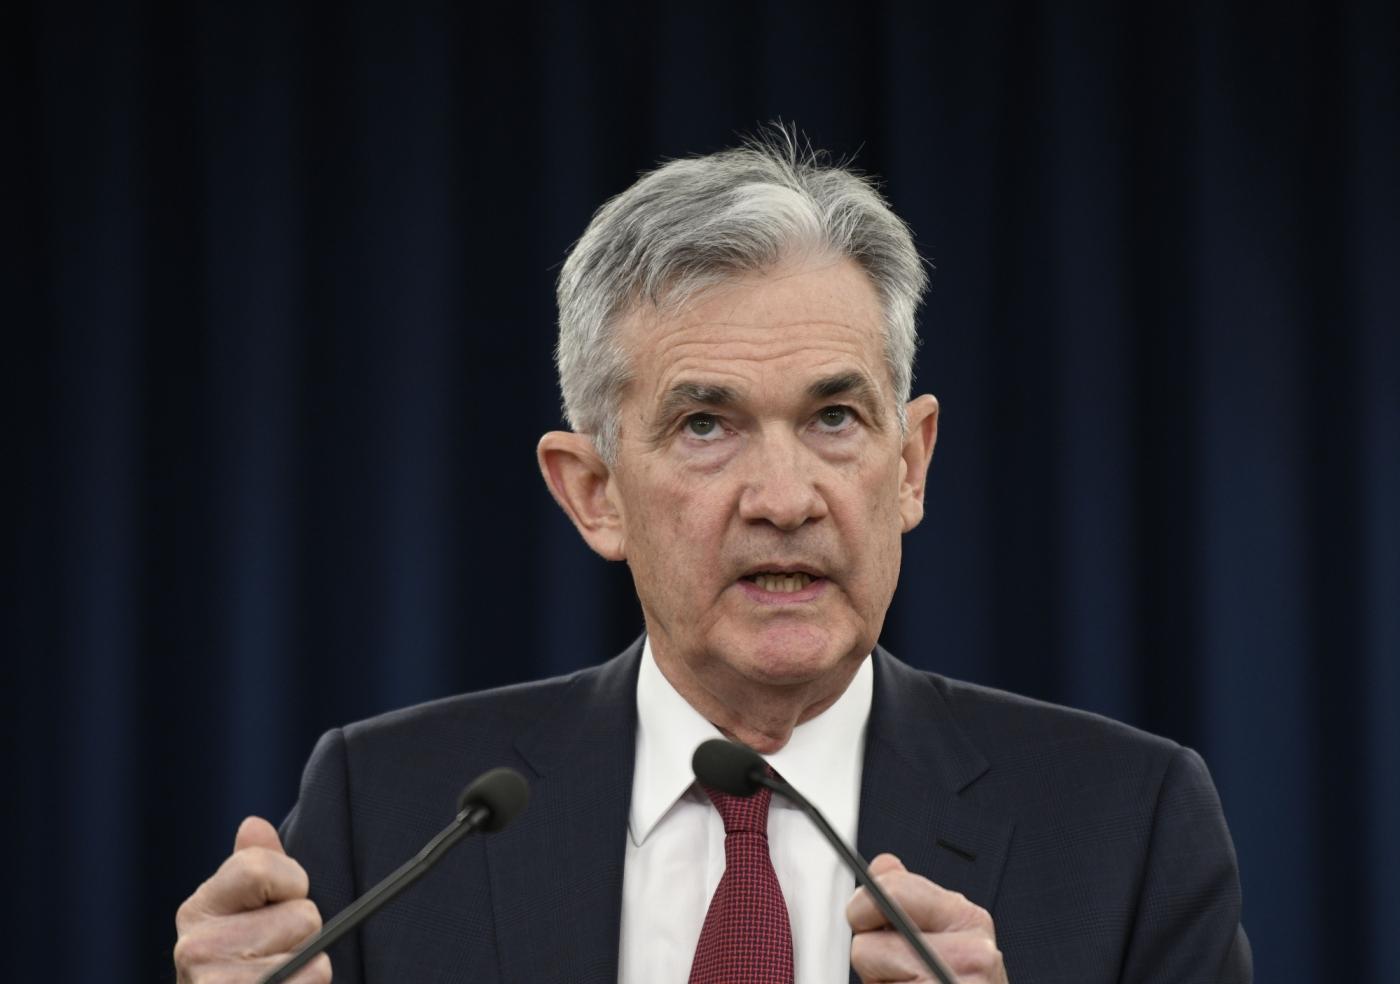 WASHINGTON, Dec. 19, 2018 (Xinhua) -- U.S. Federal Reserve Chairman Jerome Powell speaks during a press conference in Washington D.C., the United States, on Dec. 19, 2018. The U.S. Federal Reserve on Wednesday raised short-term interest rates by a quarter of a percentage point, but signaled a slower pace of rate hikes next year as the U.S. economy is expected to cool down. (Xinhua/Liu Jie/IANS) by .